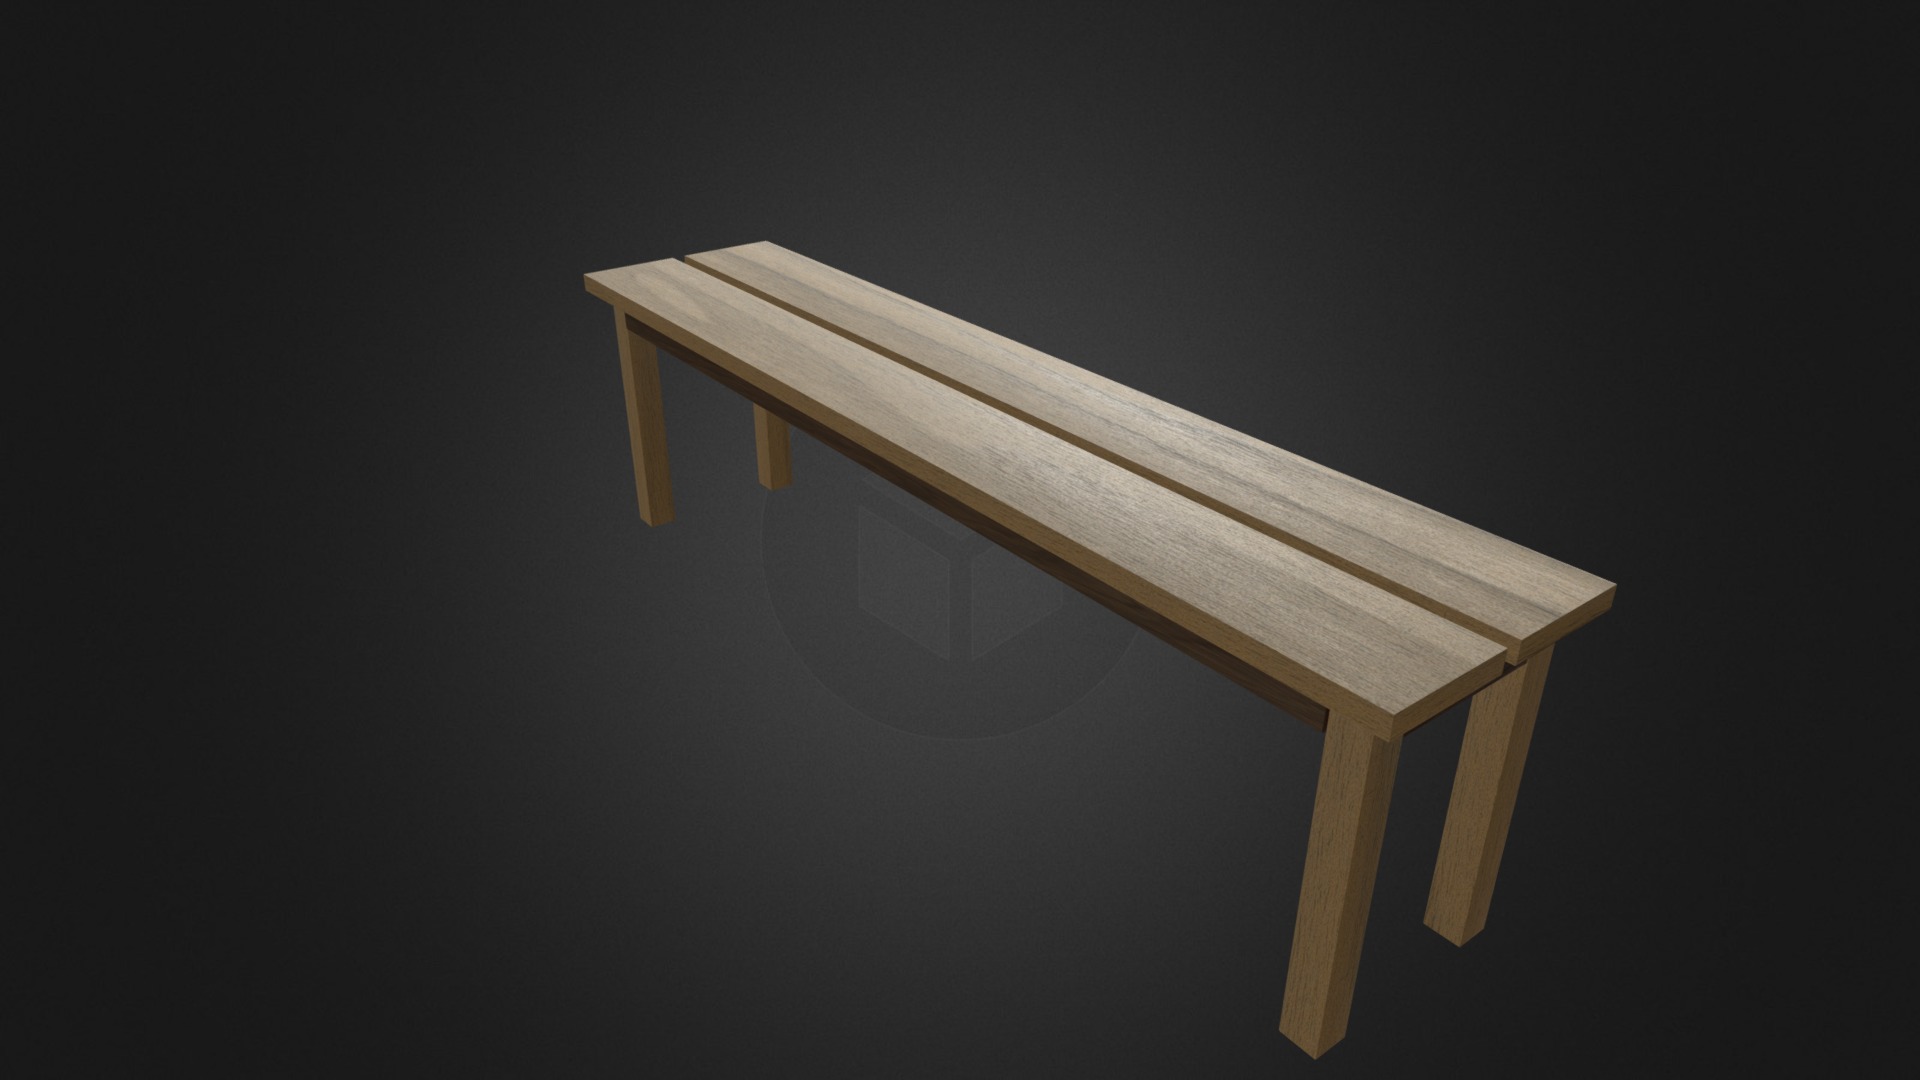 3D model Sitting Bench/Table for Home Decor - This is a 3D model of the Sitting Bench/Table for Home Decor. The 3D model is about a wooden table with a glass top.